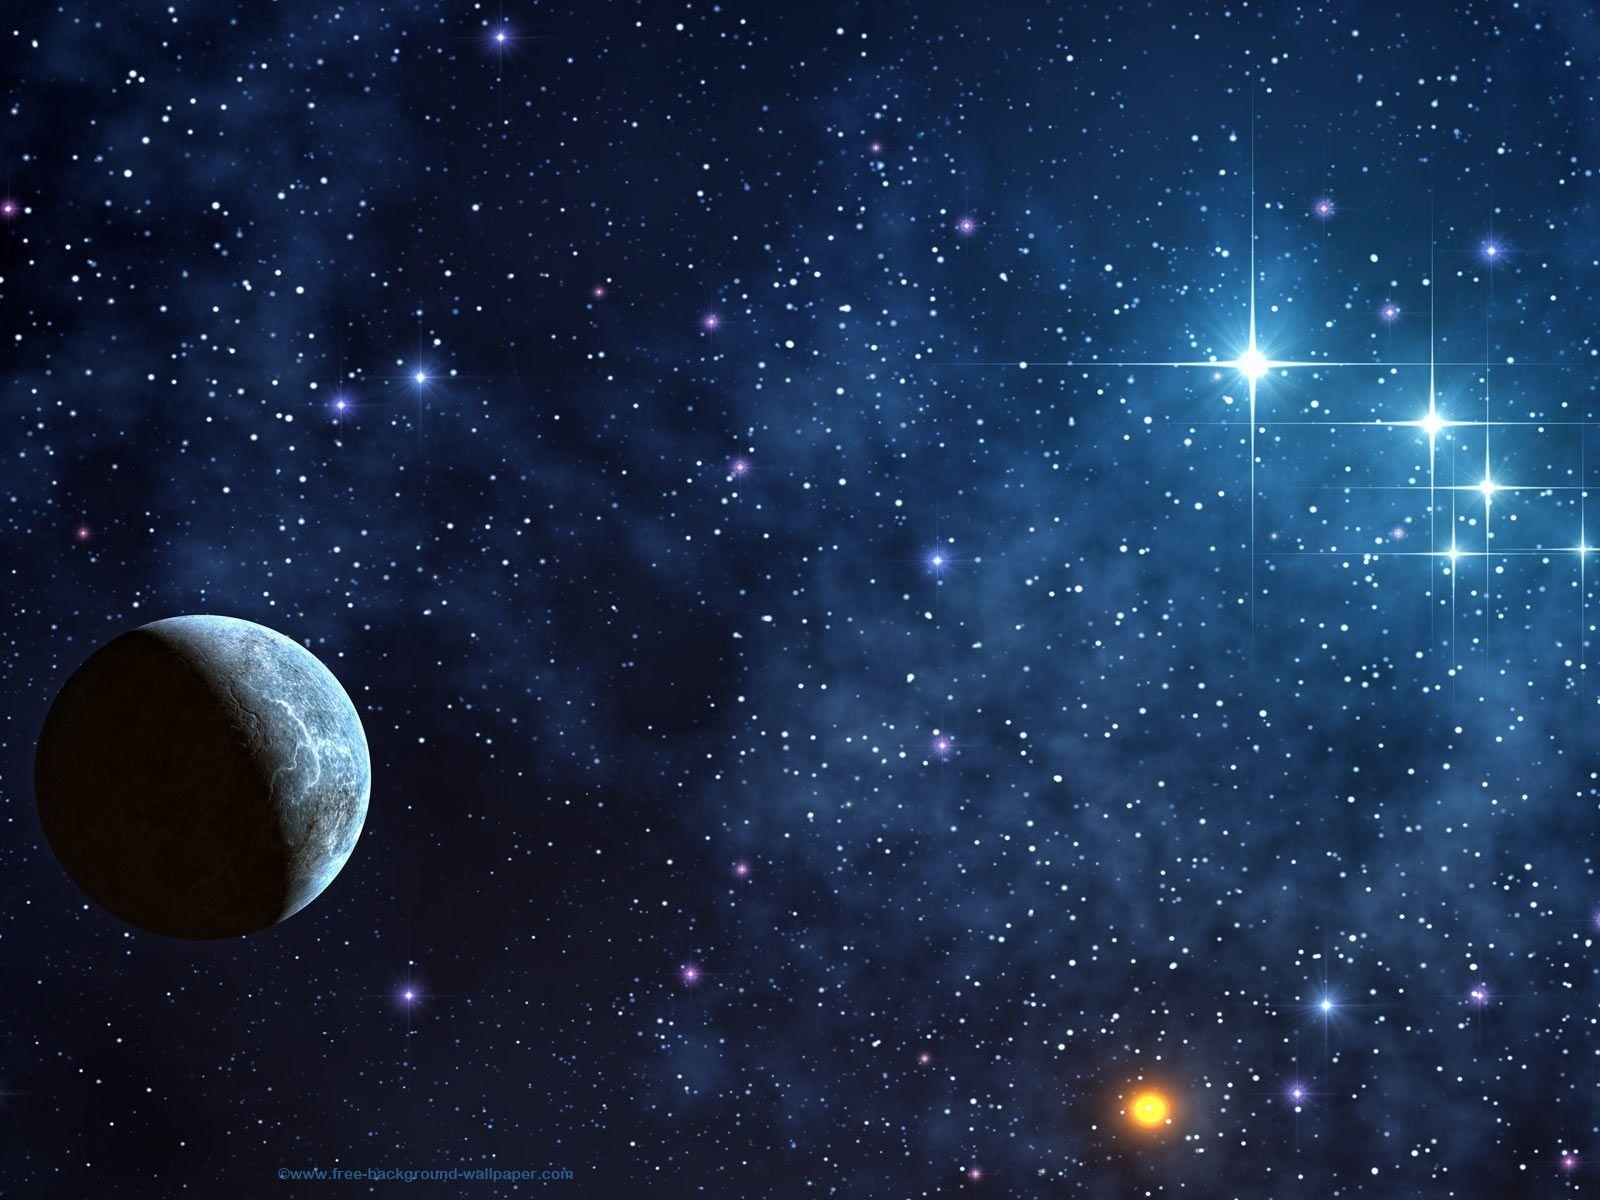 stars in space backgrounds - wallpaper cave